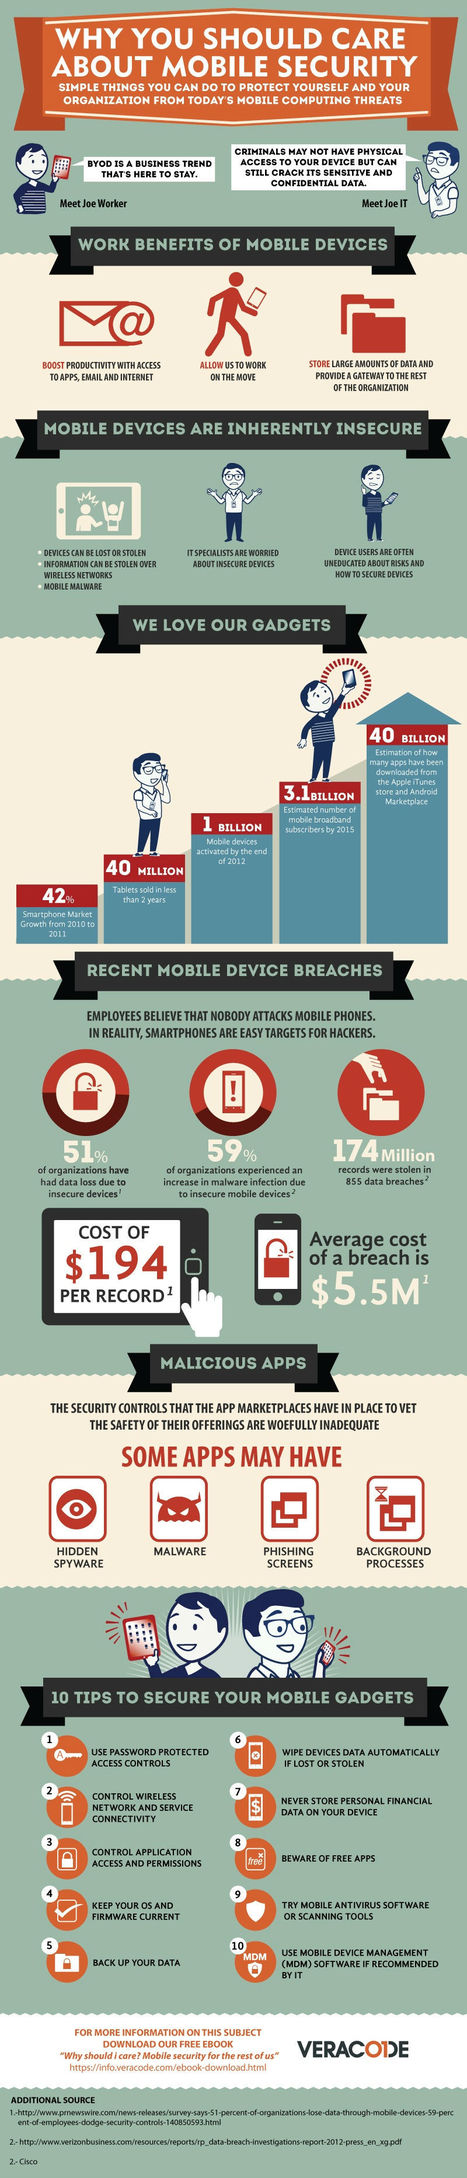 Why You Should Care About Mobile Security [INFOGRAPHIC] | Latest Social Media News | Scoop.it